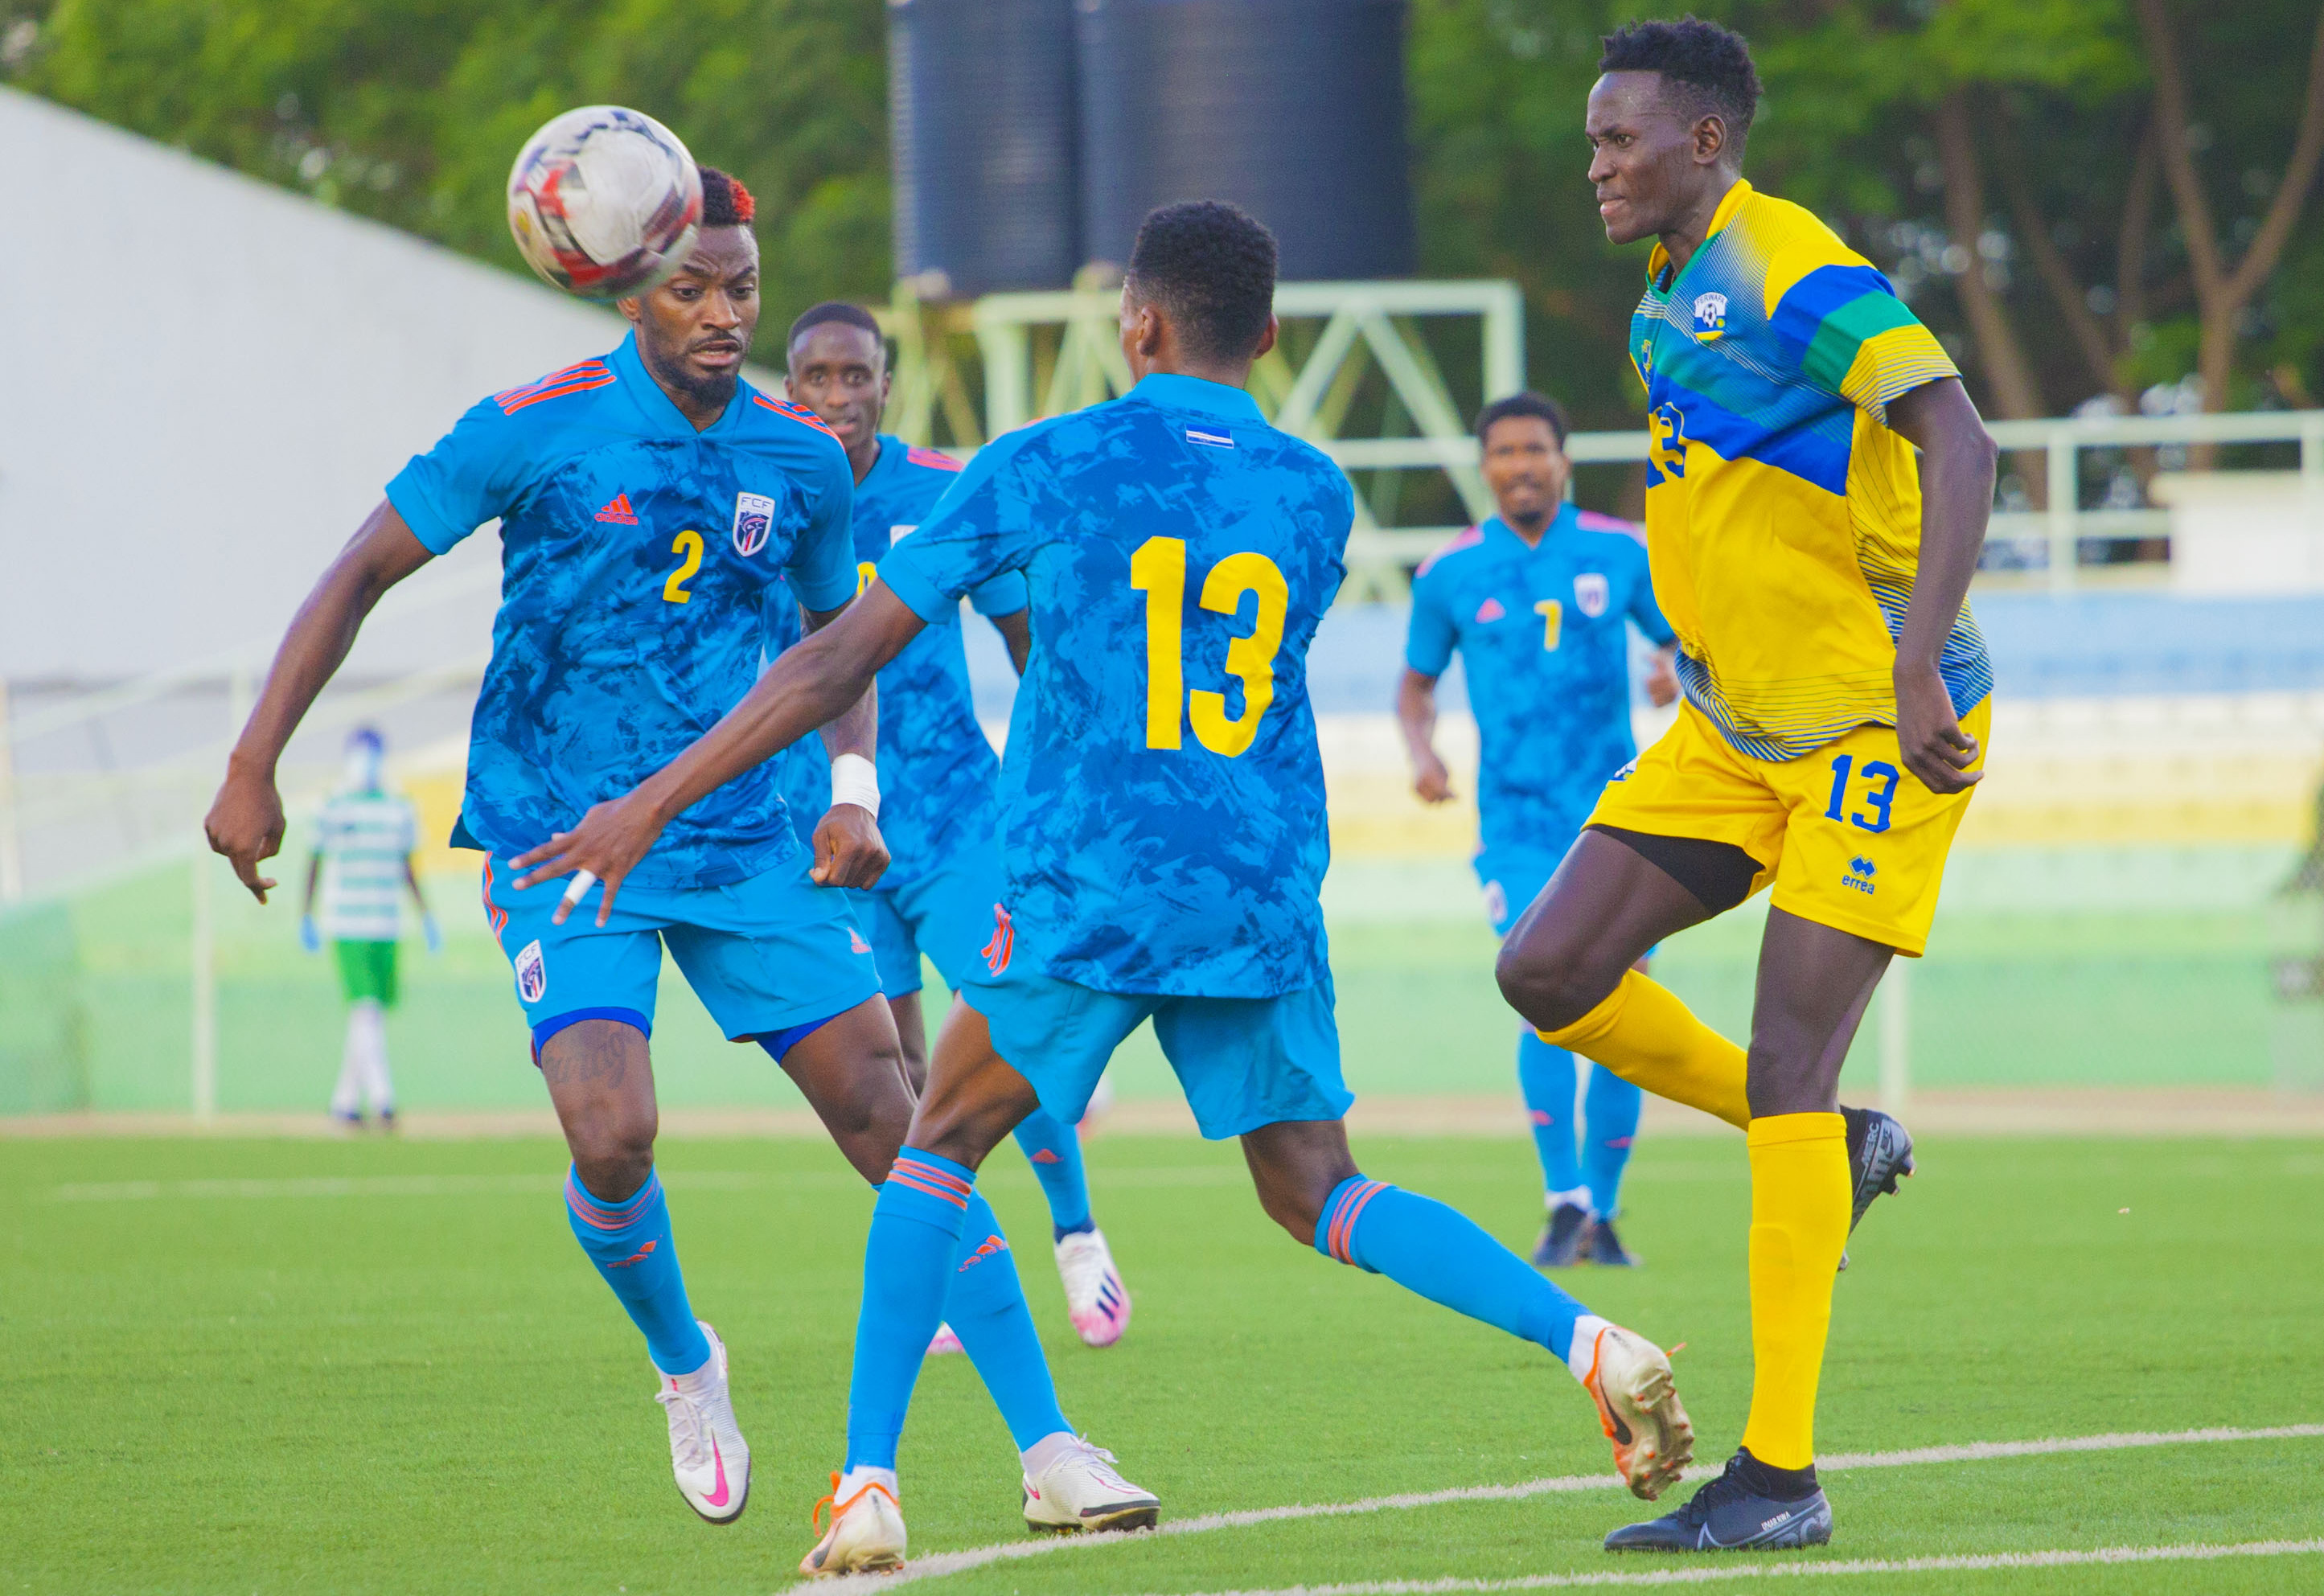 Rwanda is the only country which has not scored a goal in the Afcon qualifiers after four rounds. Photo by Hardi Uwihanganye